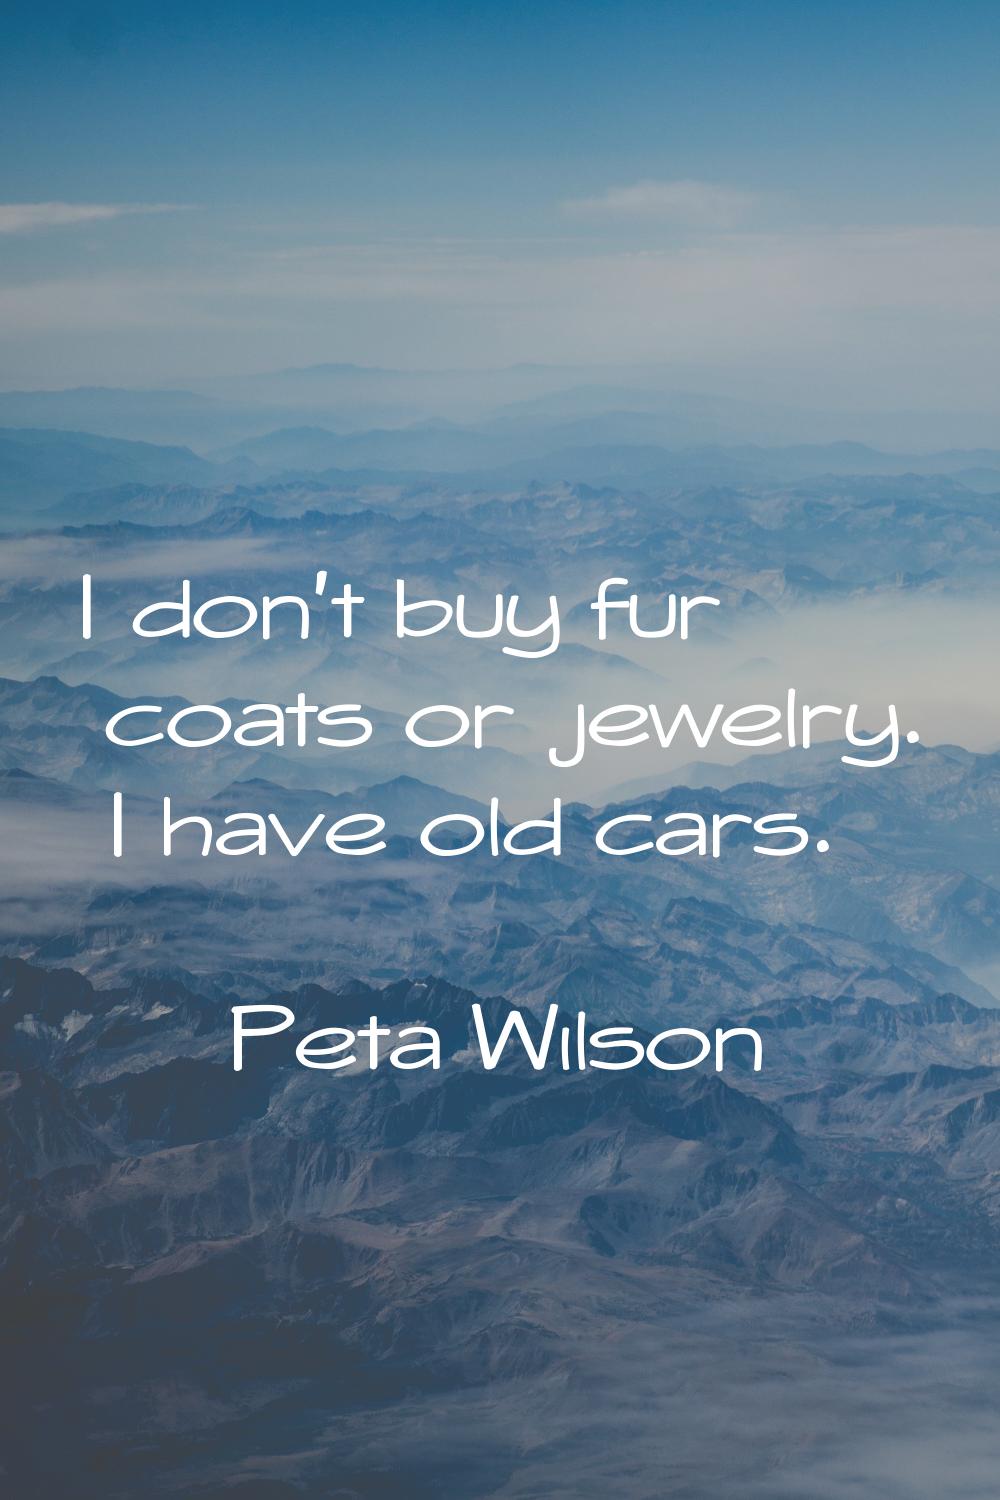 I don't buy fur coats or jewelry. I have old cars.